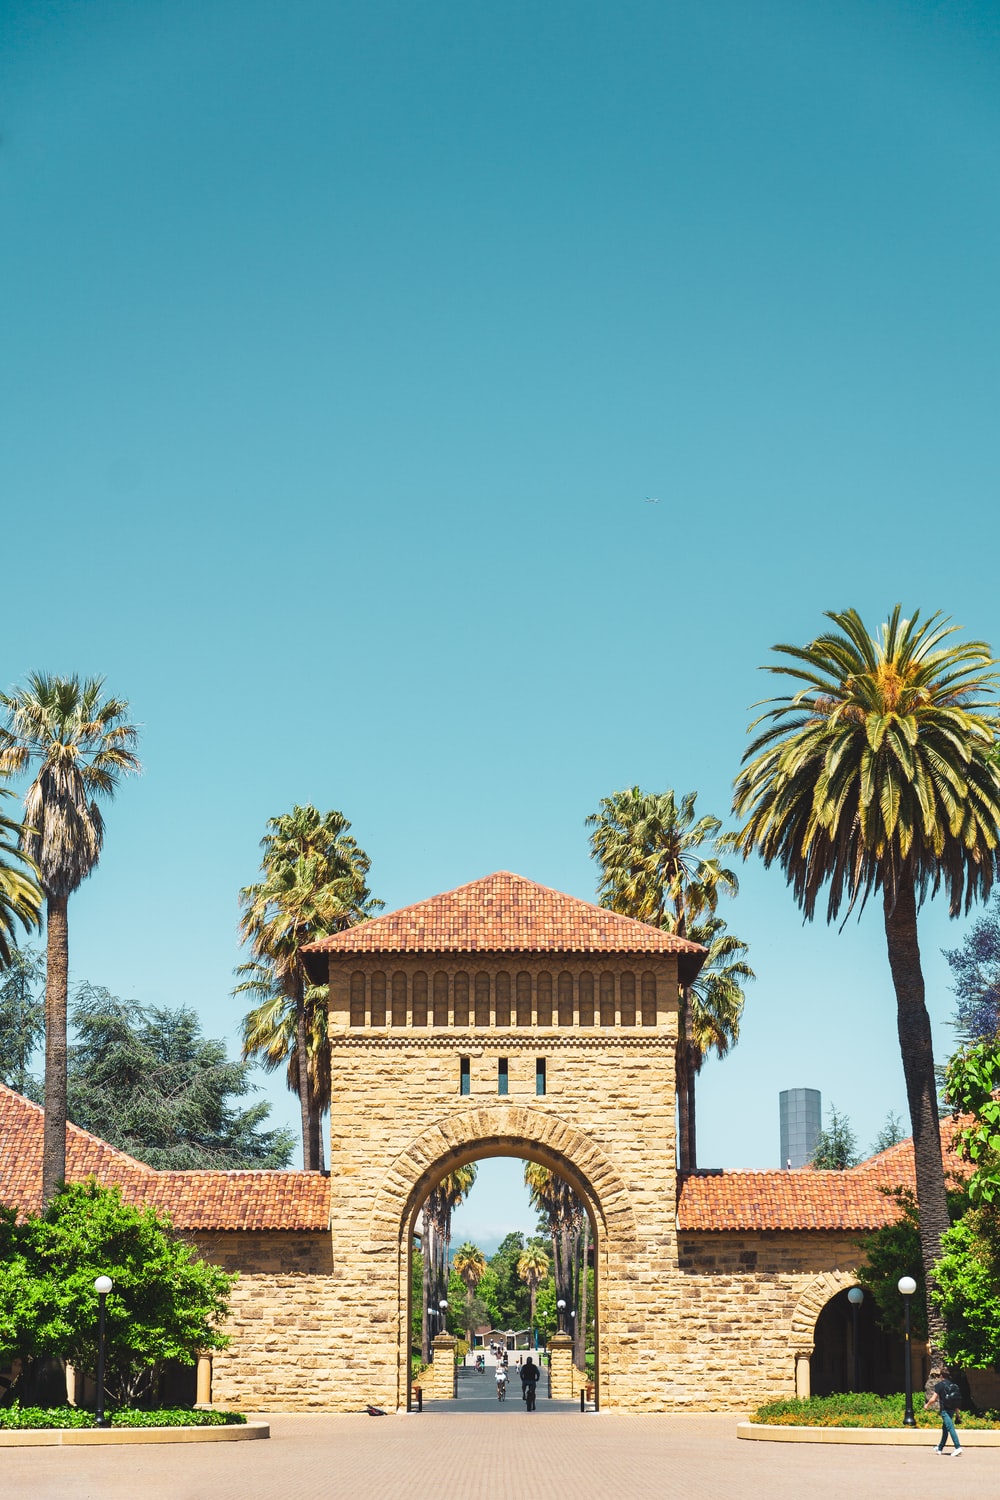 Stanford University Wallpapers